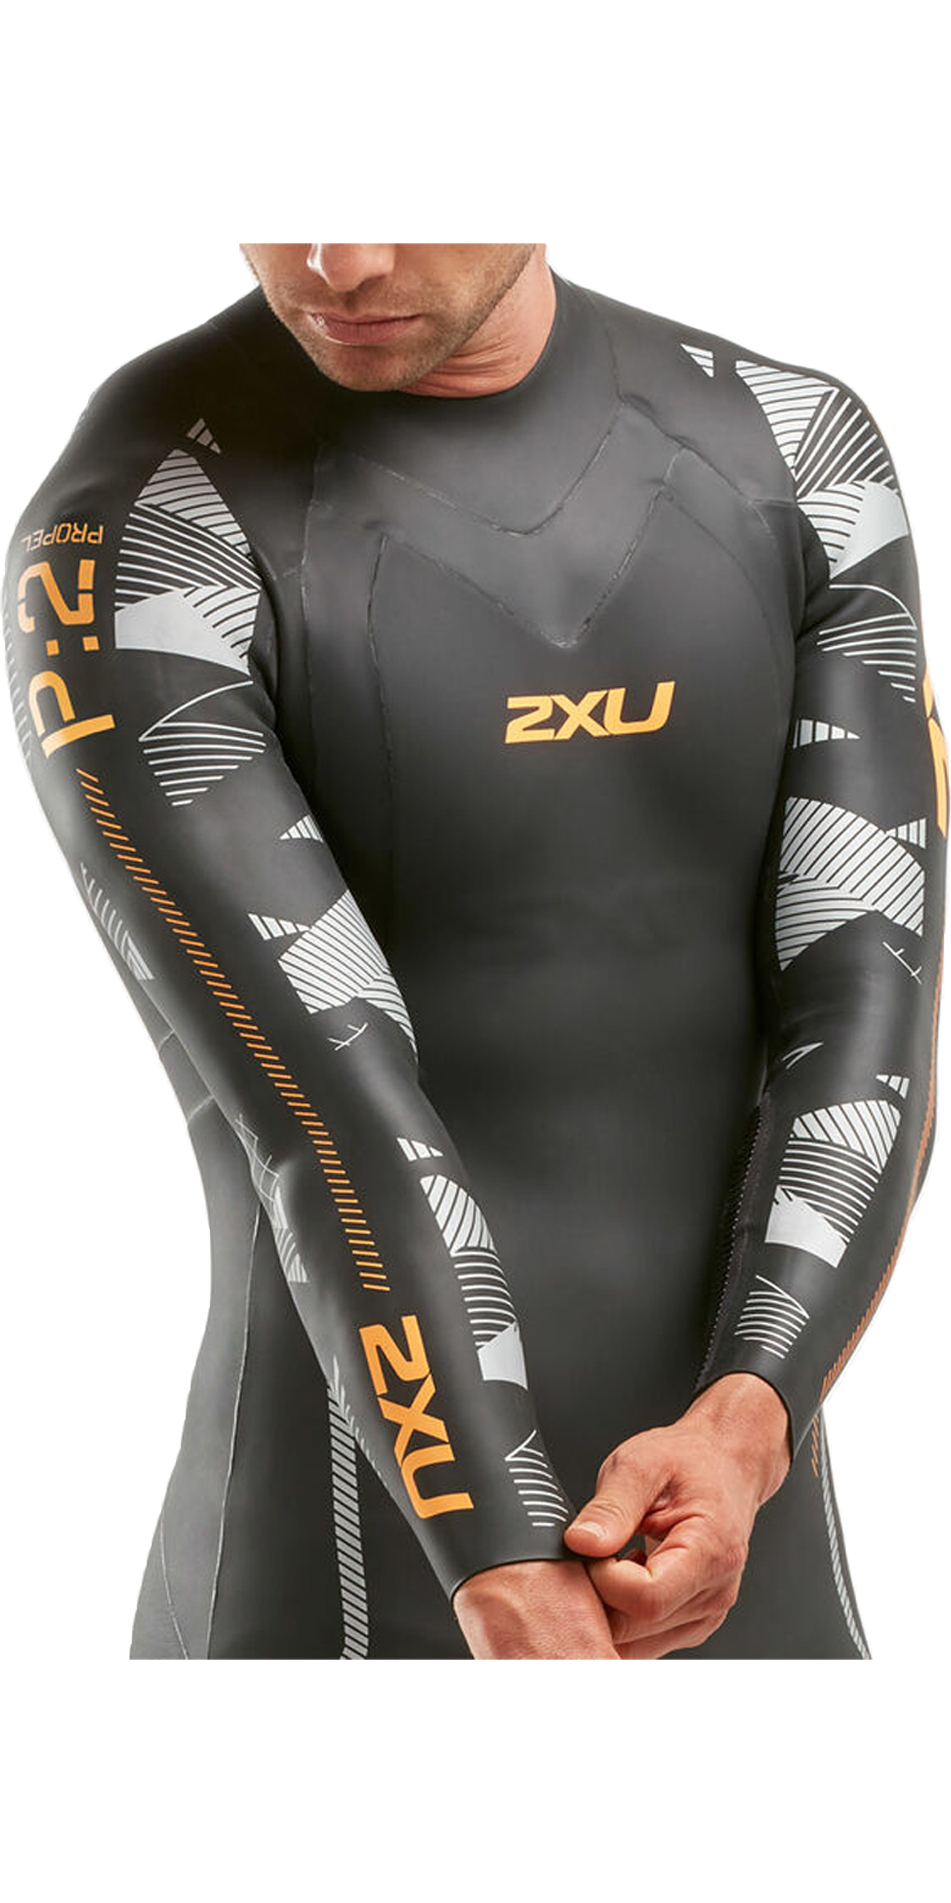 2XU Mens MW4991c-P1 Propel Wetsuit Large Tall Black/Blue Ombre 